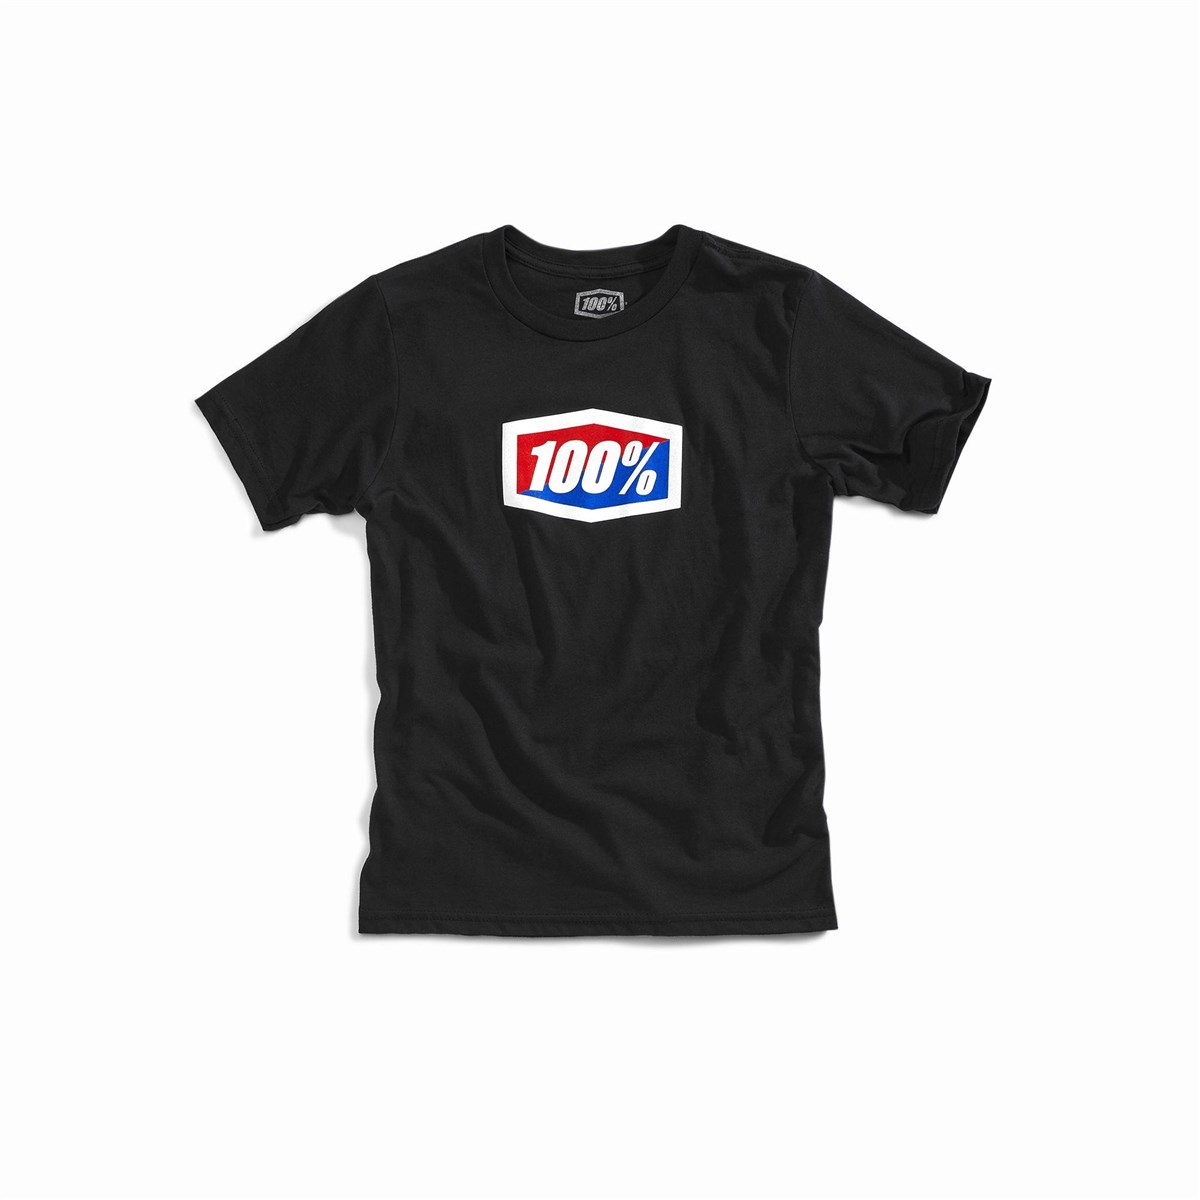 100% Official Youth Short Sleeve T-Shirt product image